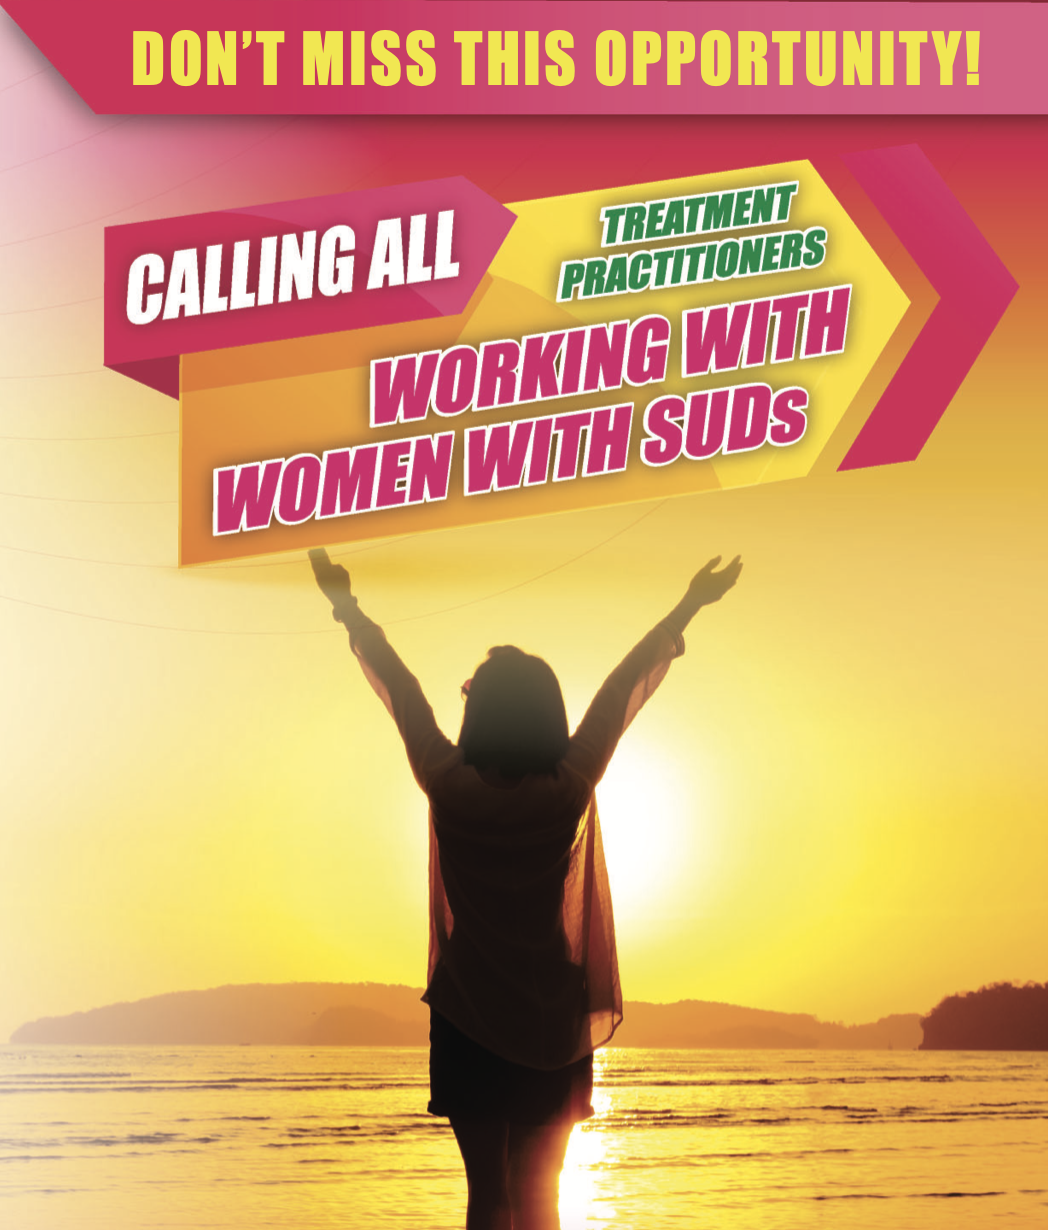 Calling all Treatment Practitioners working with women with SUDs